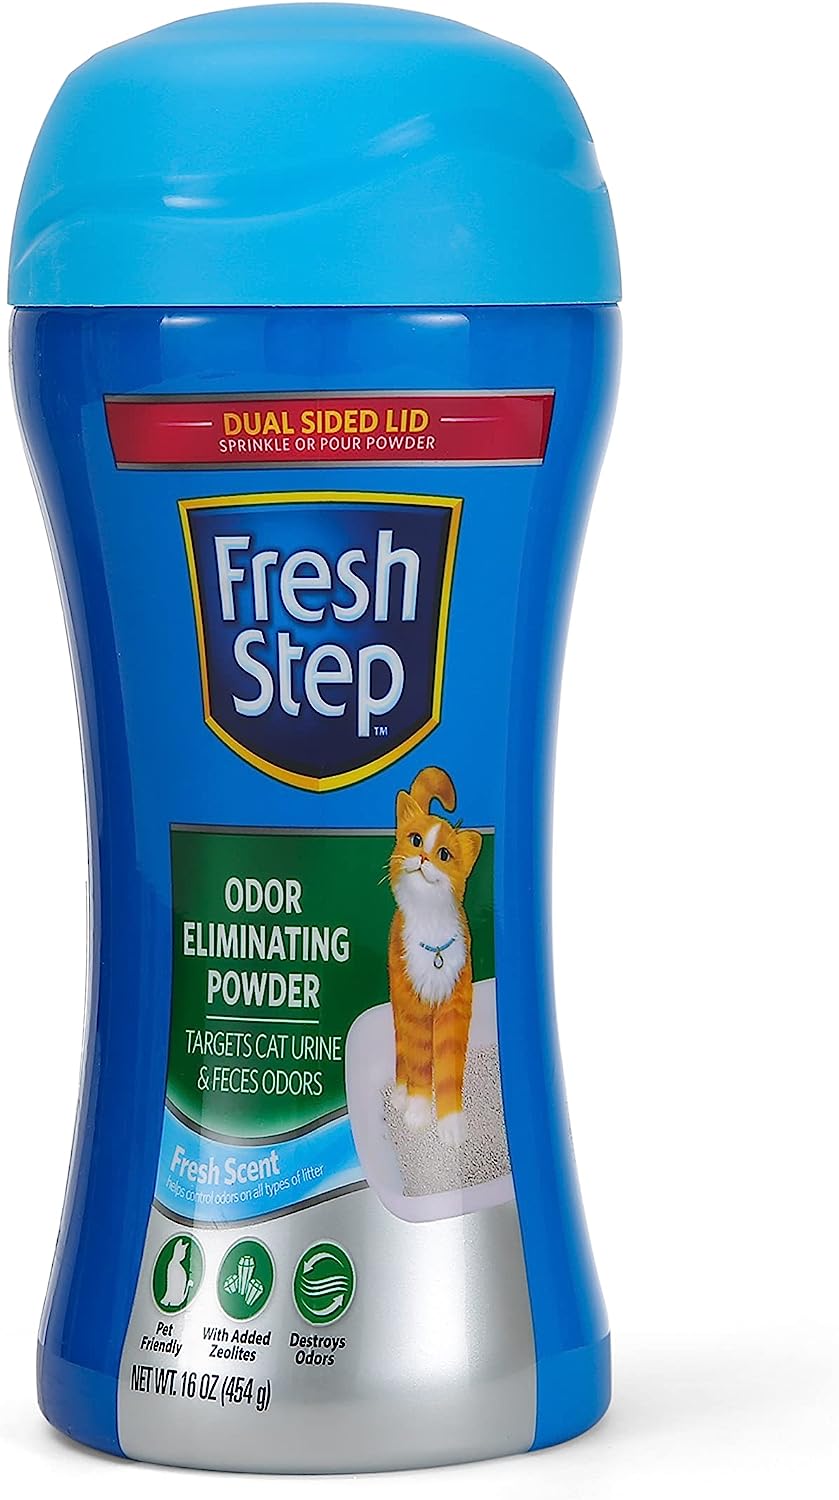 litter box for smell product review